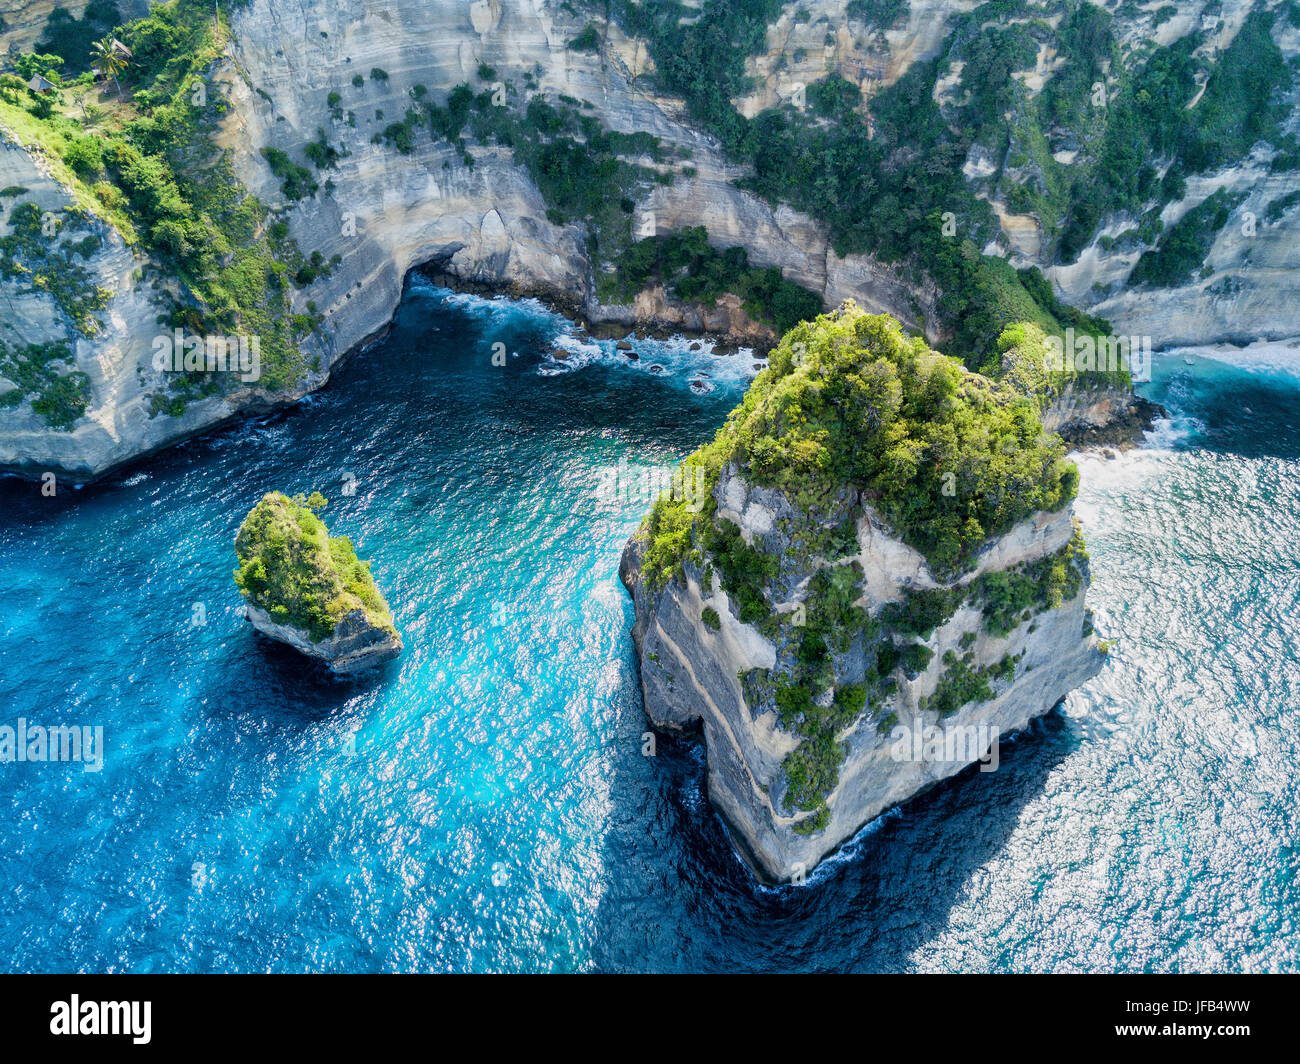 Aerial View of small islands near the Atuh Raja Lima lookout point on the island of Nusa Penida, near Bali, Indonesia. Stock Photo